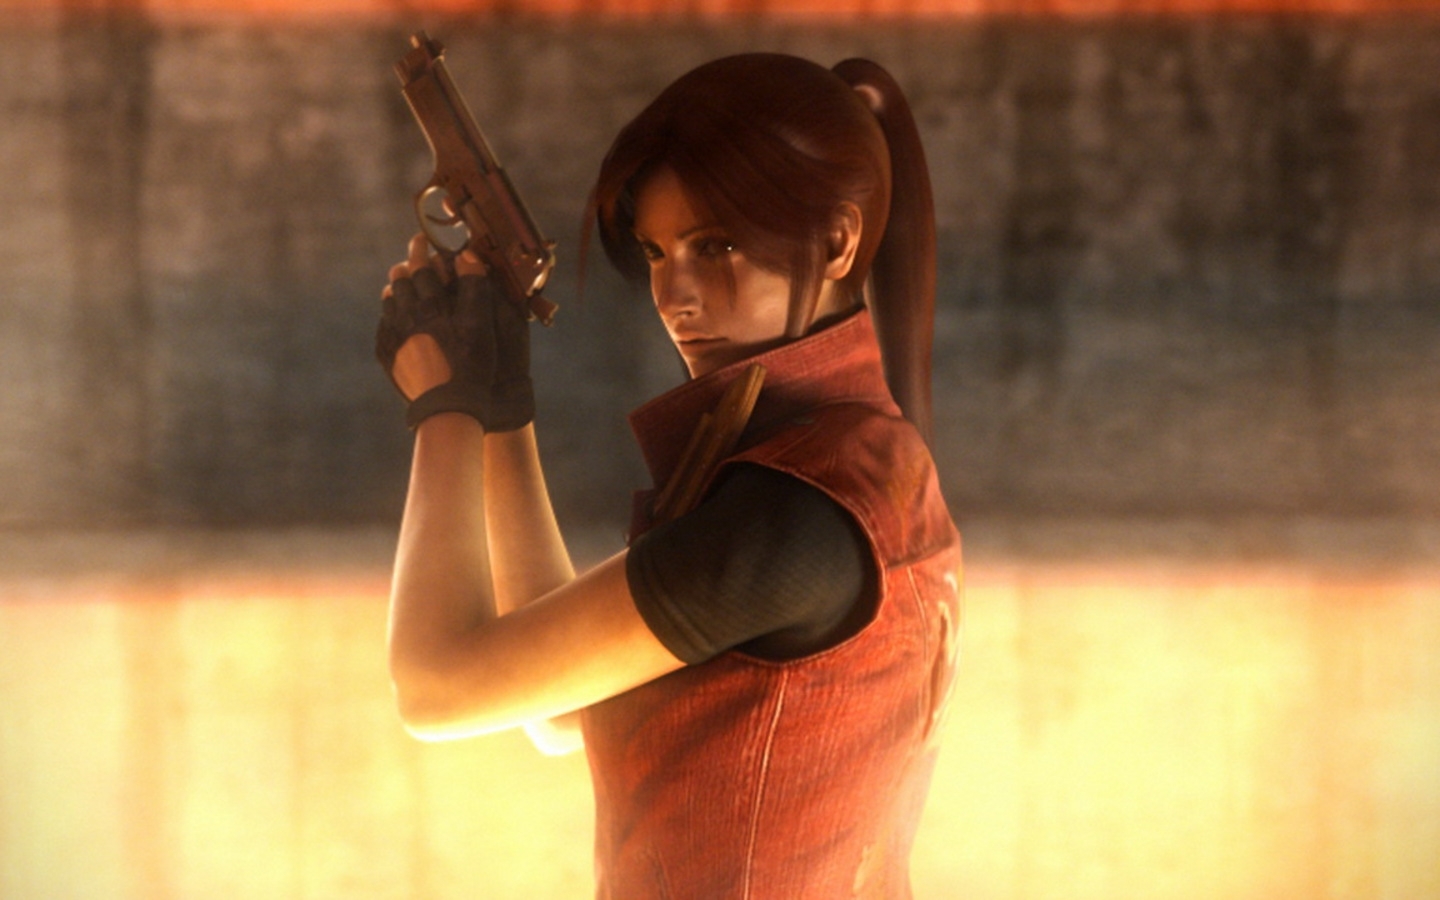 Claire-in-Darkside-Chronicles-claire-redfield-15844209-1440-900.jpg